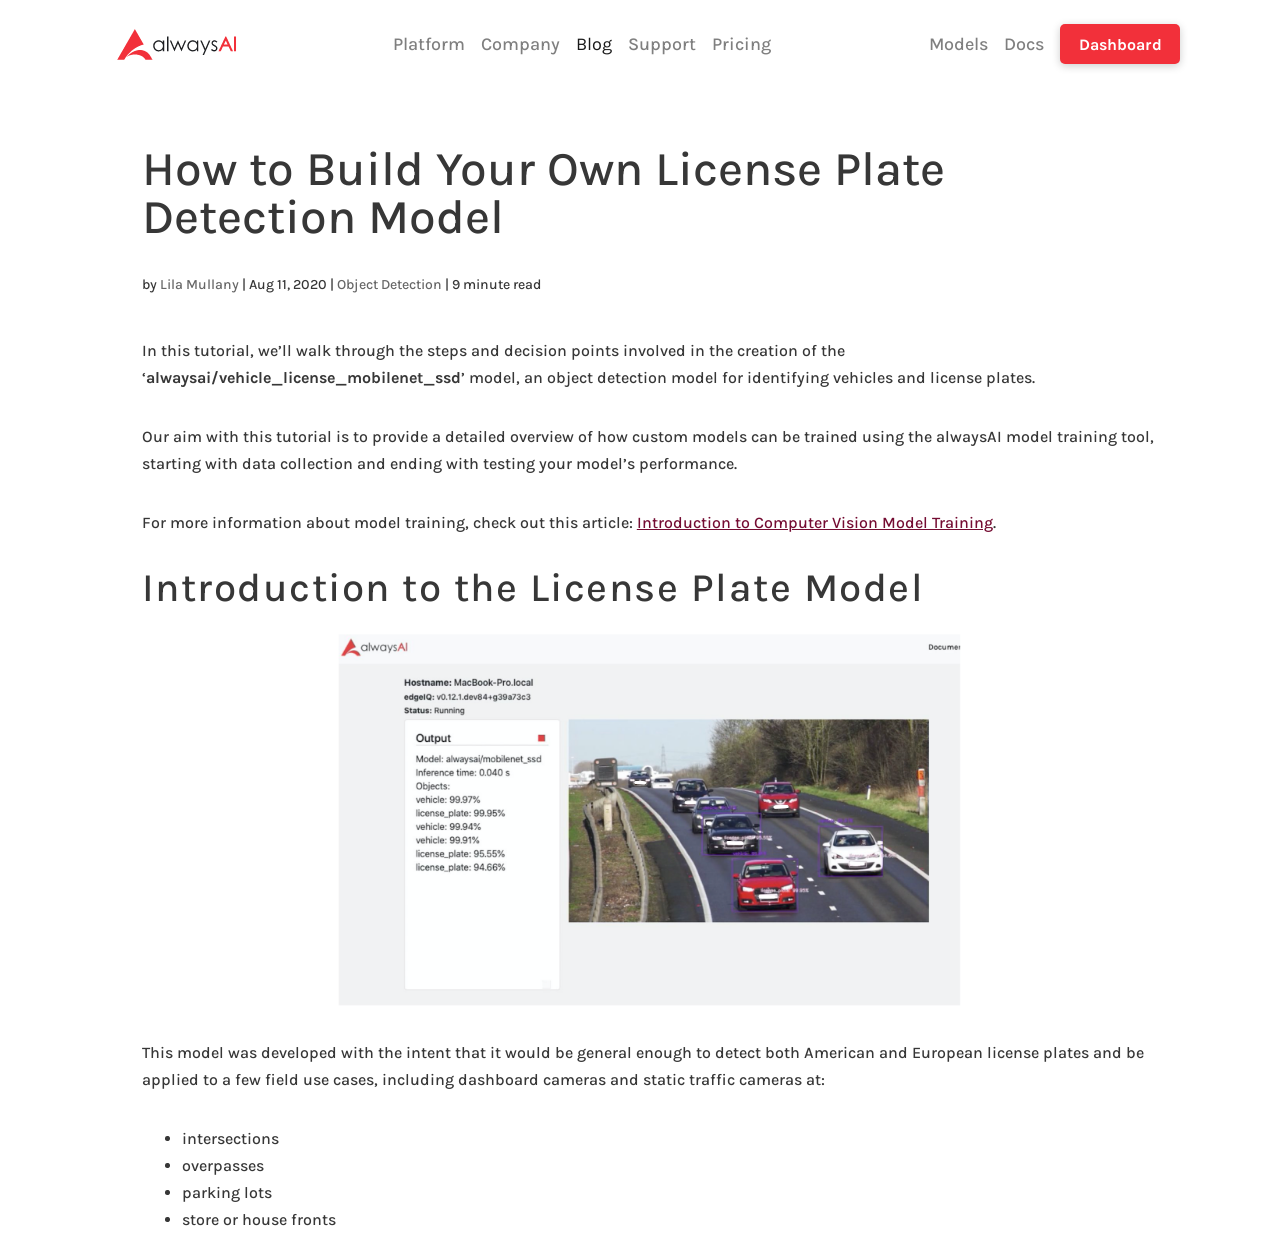 How to Build Your Own License Plate Detection Model Thumbnail